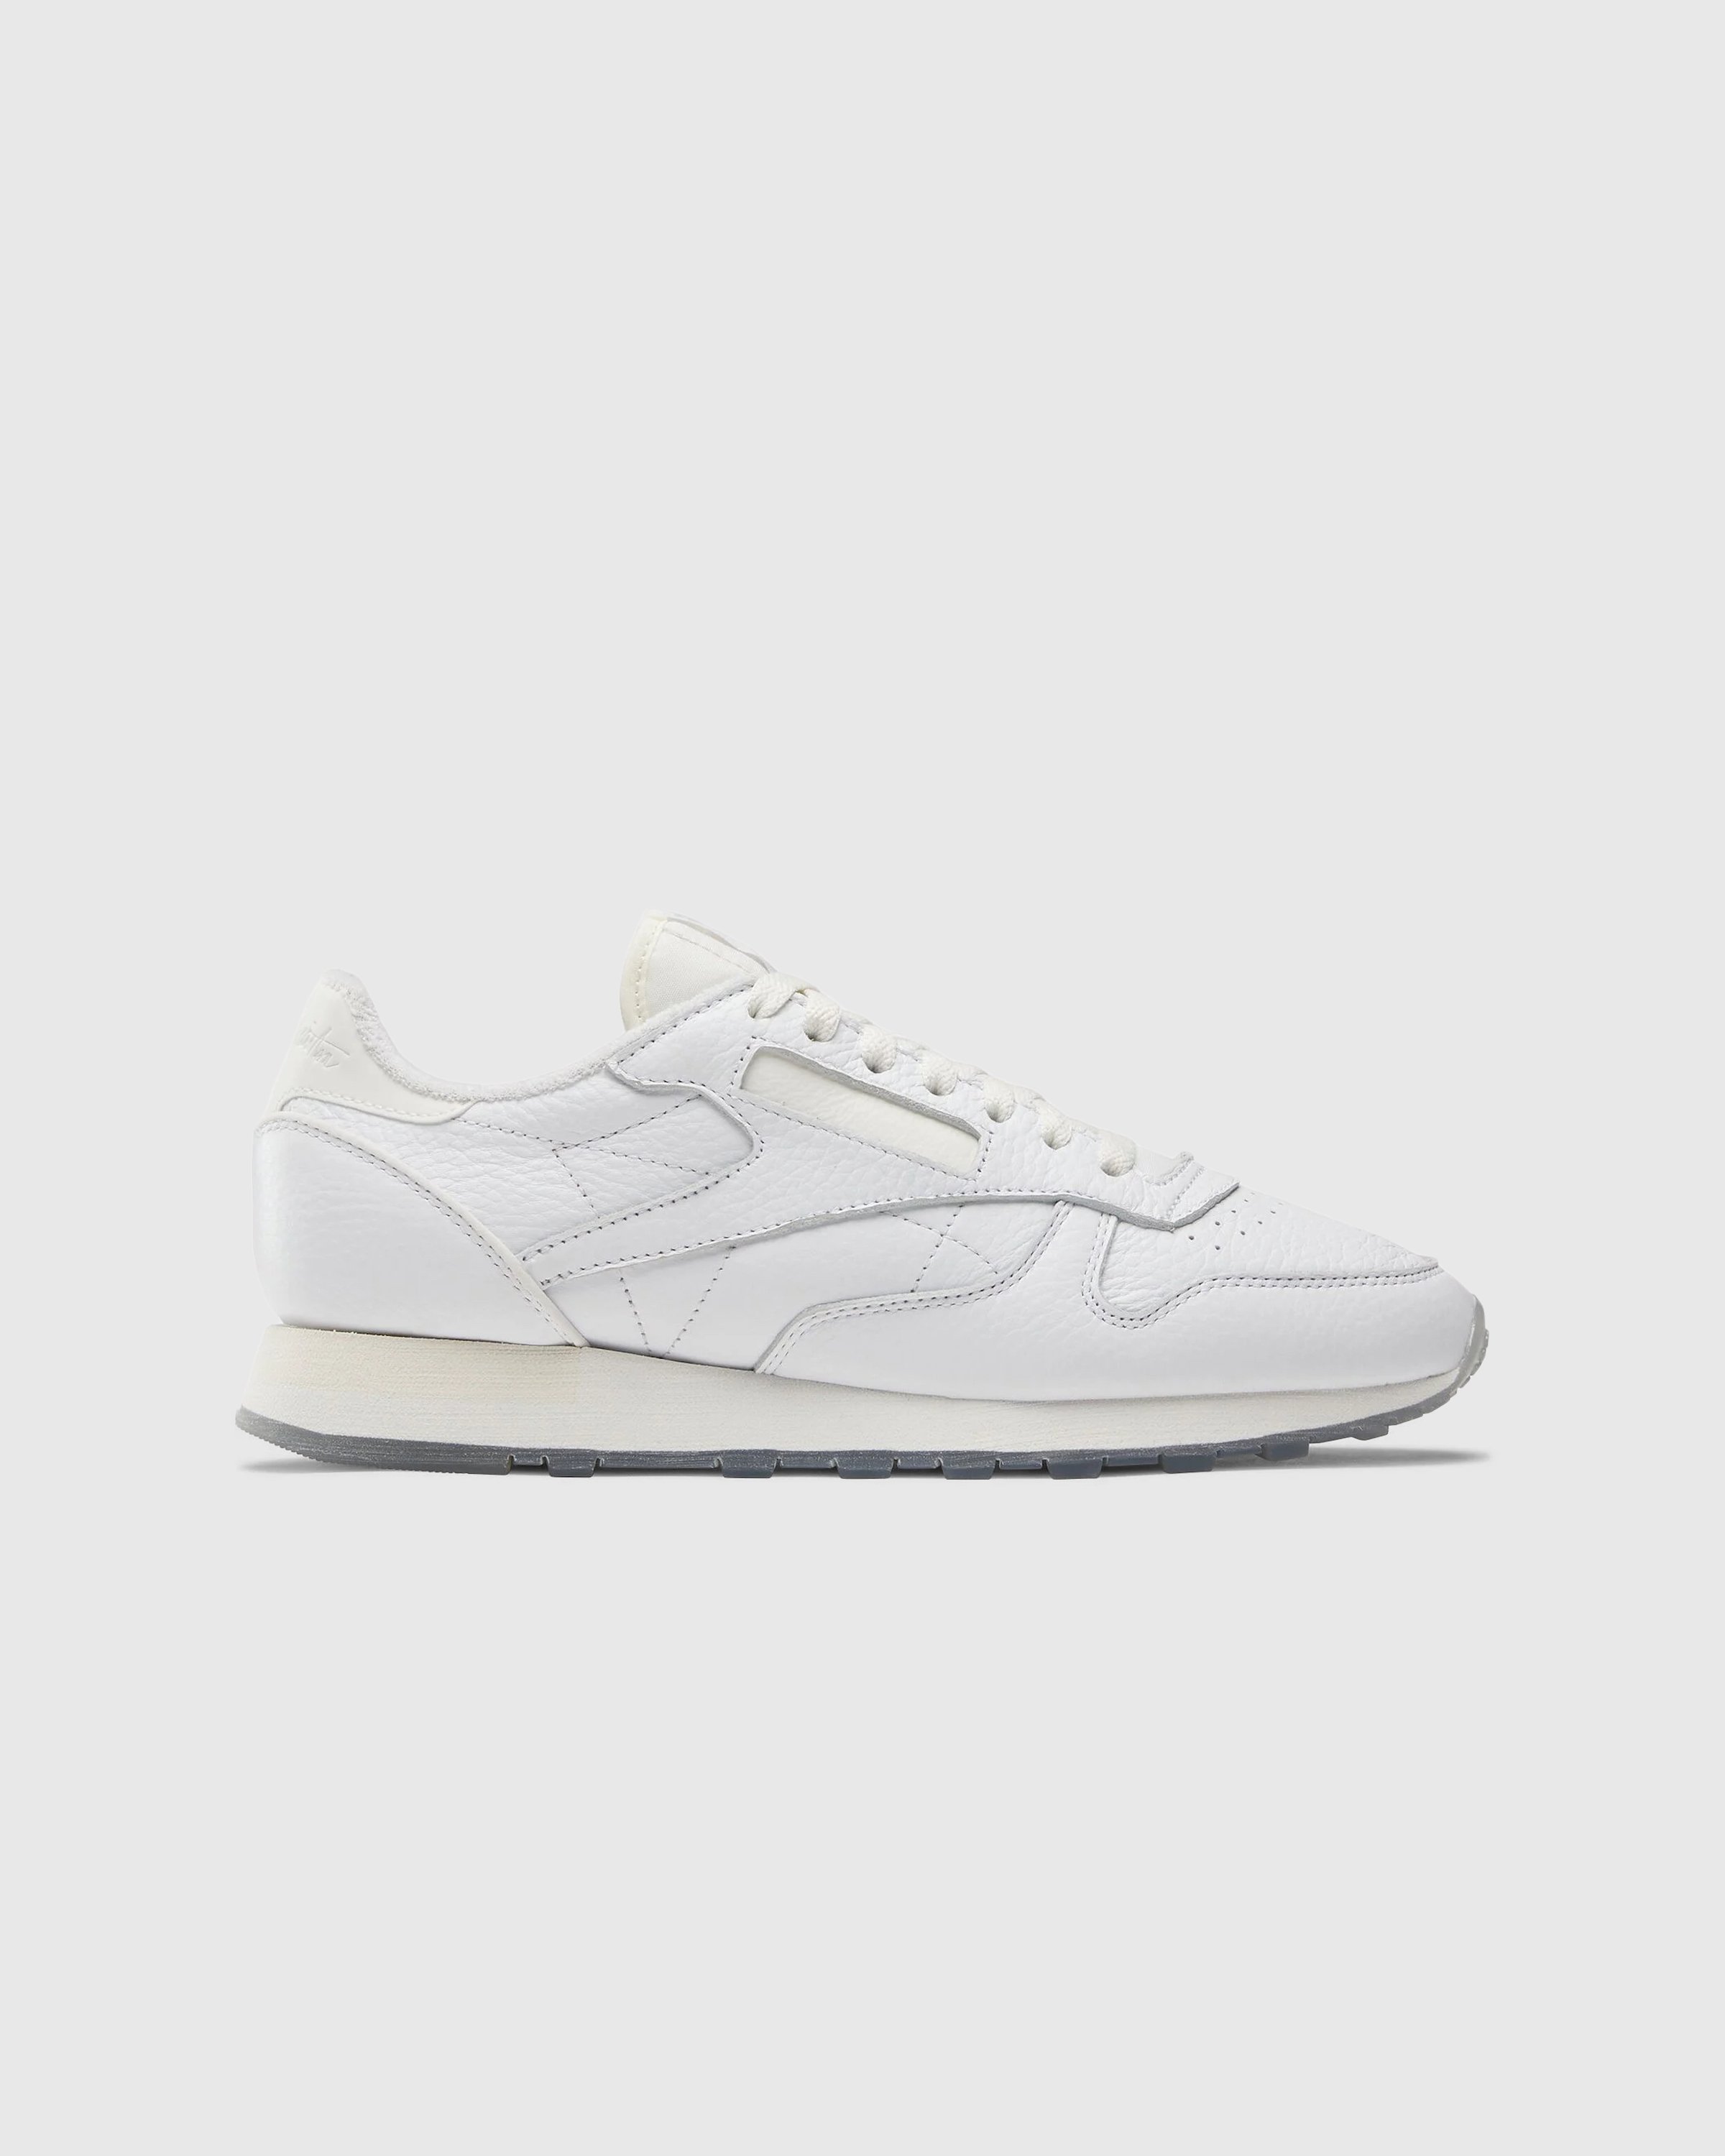 Reebok x Tyrell Winston - Classic Leather ftwr white/chalk/cold grey 2 - Footwear - White - Image 1